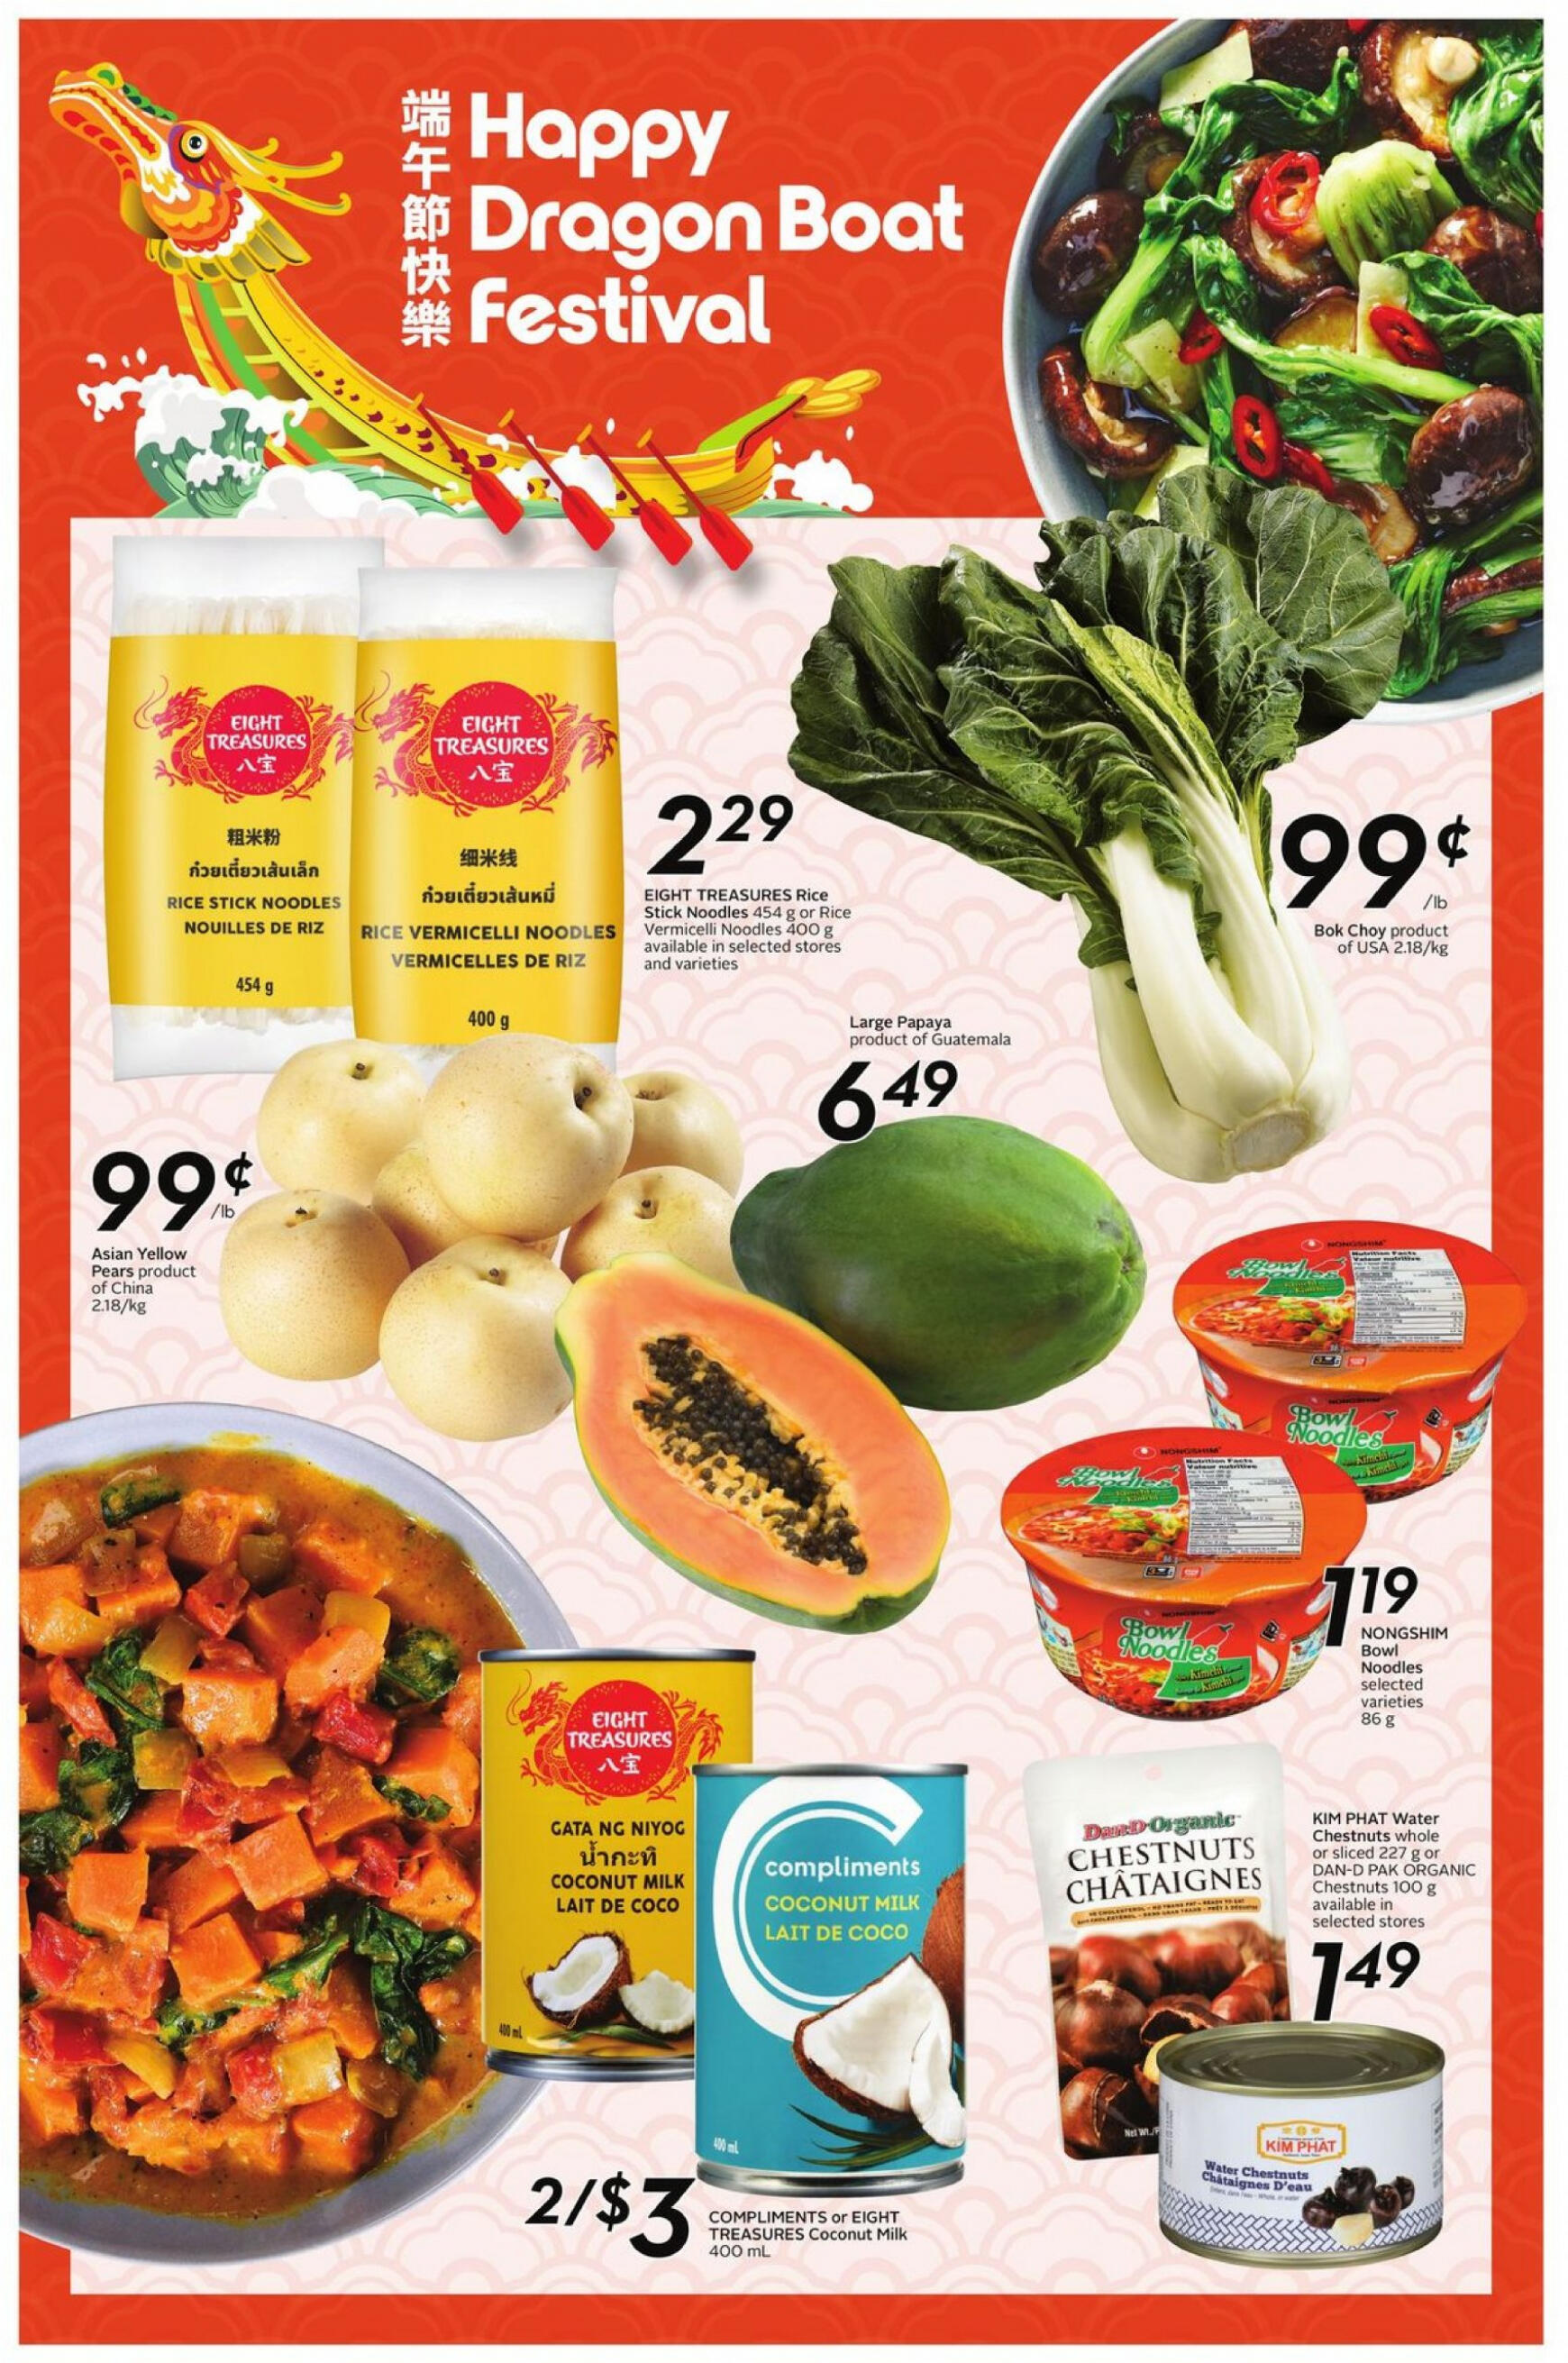 sobeys - Sobeys - Weekly Flyer - Ontario flyer current 16.05. - 22.05. - page: 14